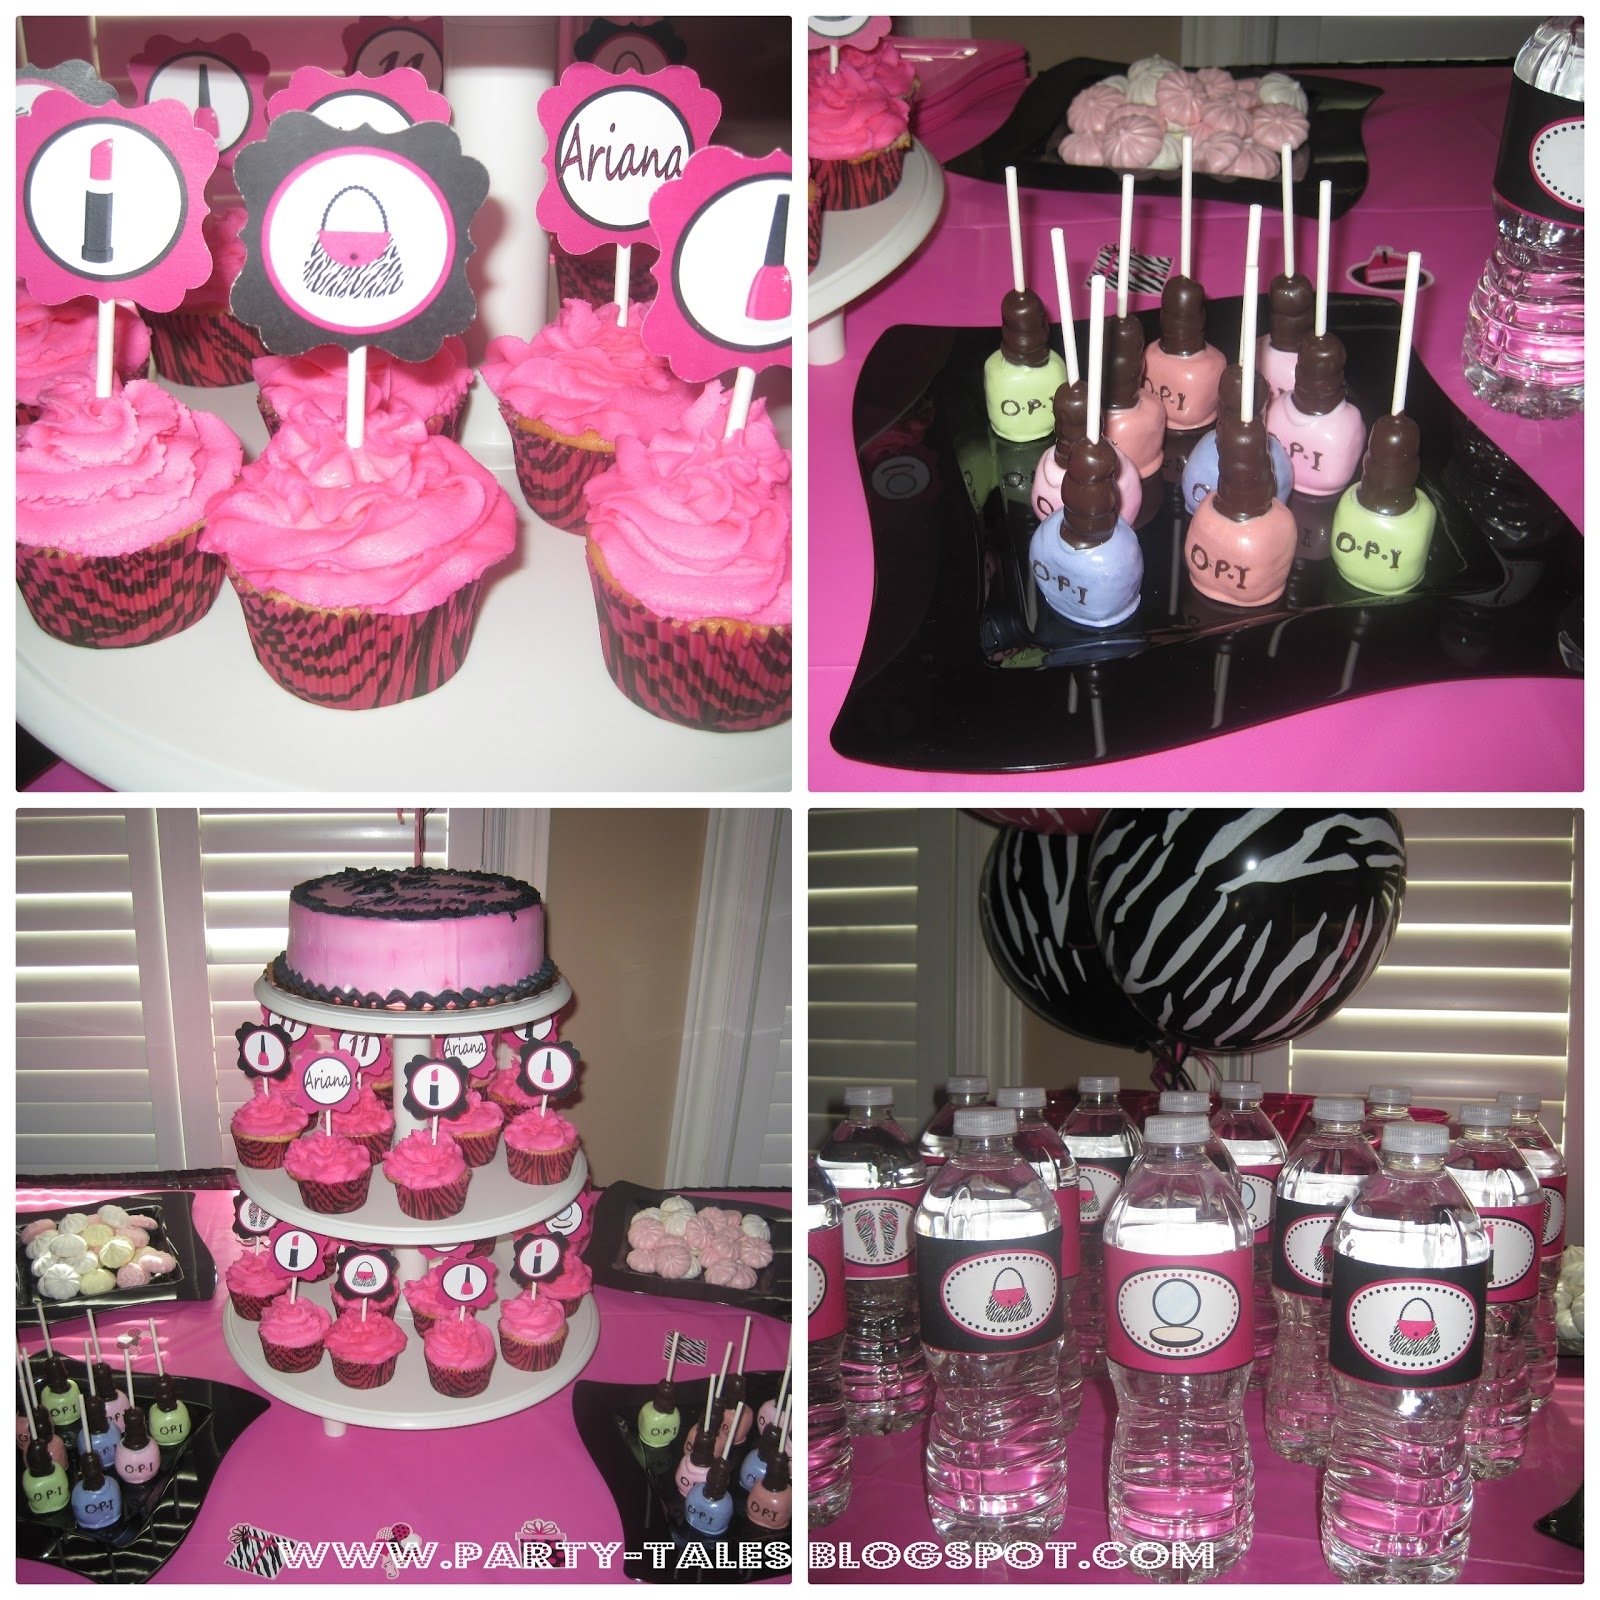 10 Ideal Pink And Zebra Party Ideas party tales birthday party zebra print and hot pink diva spa party 1 2022